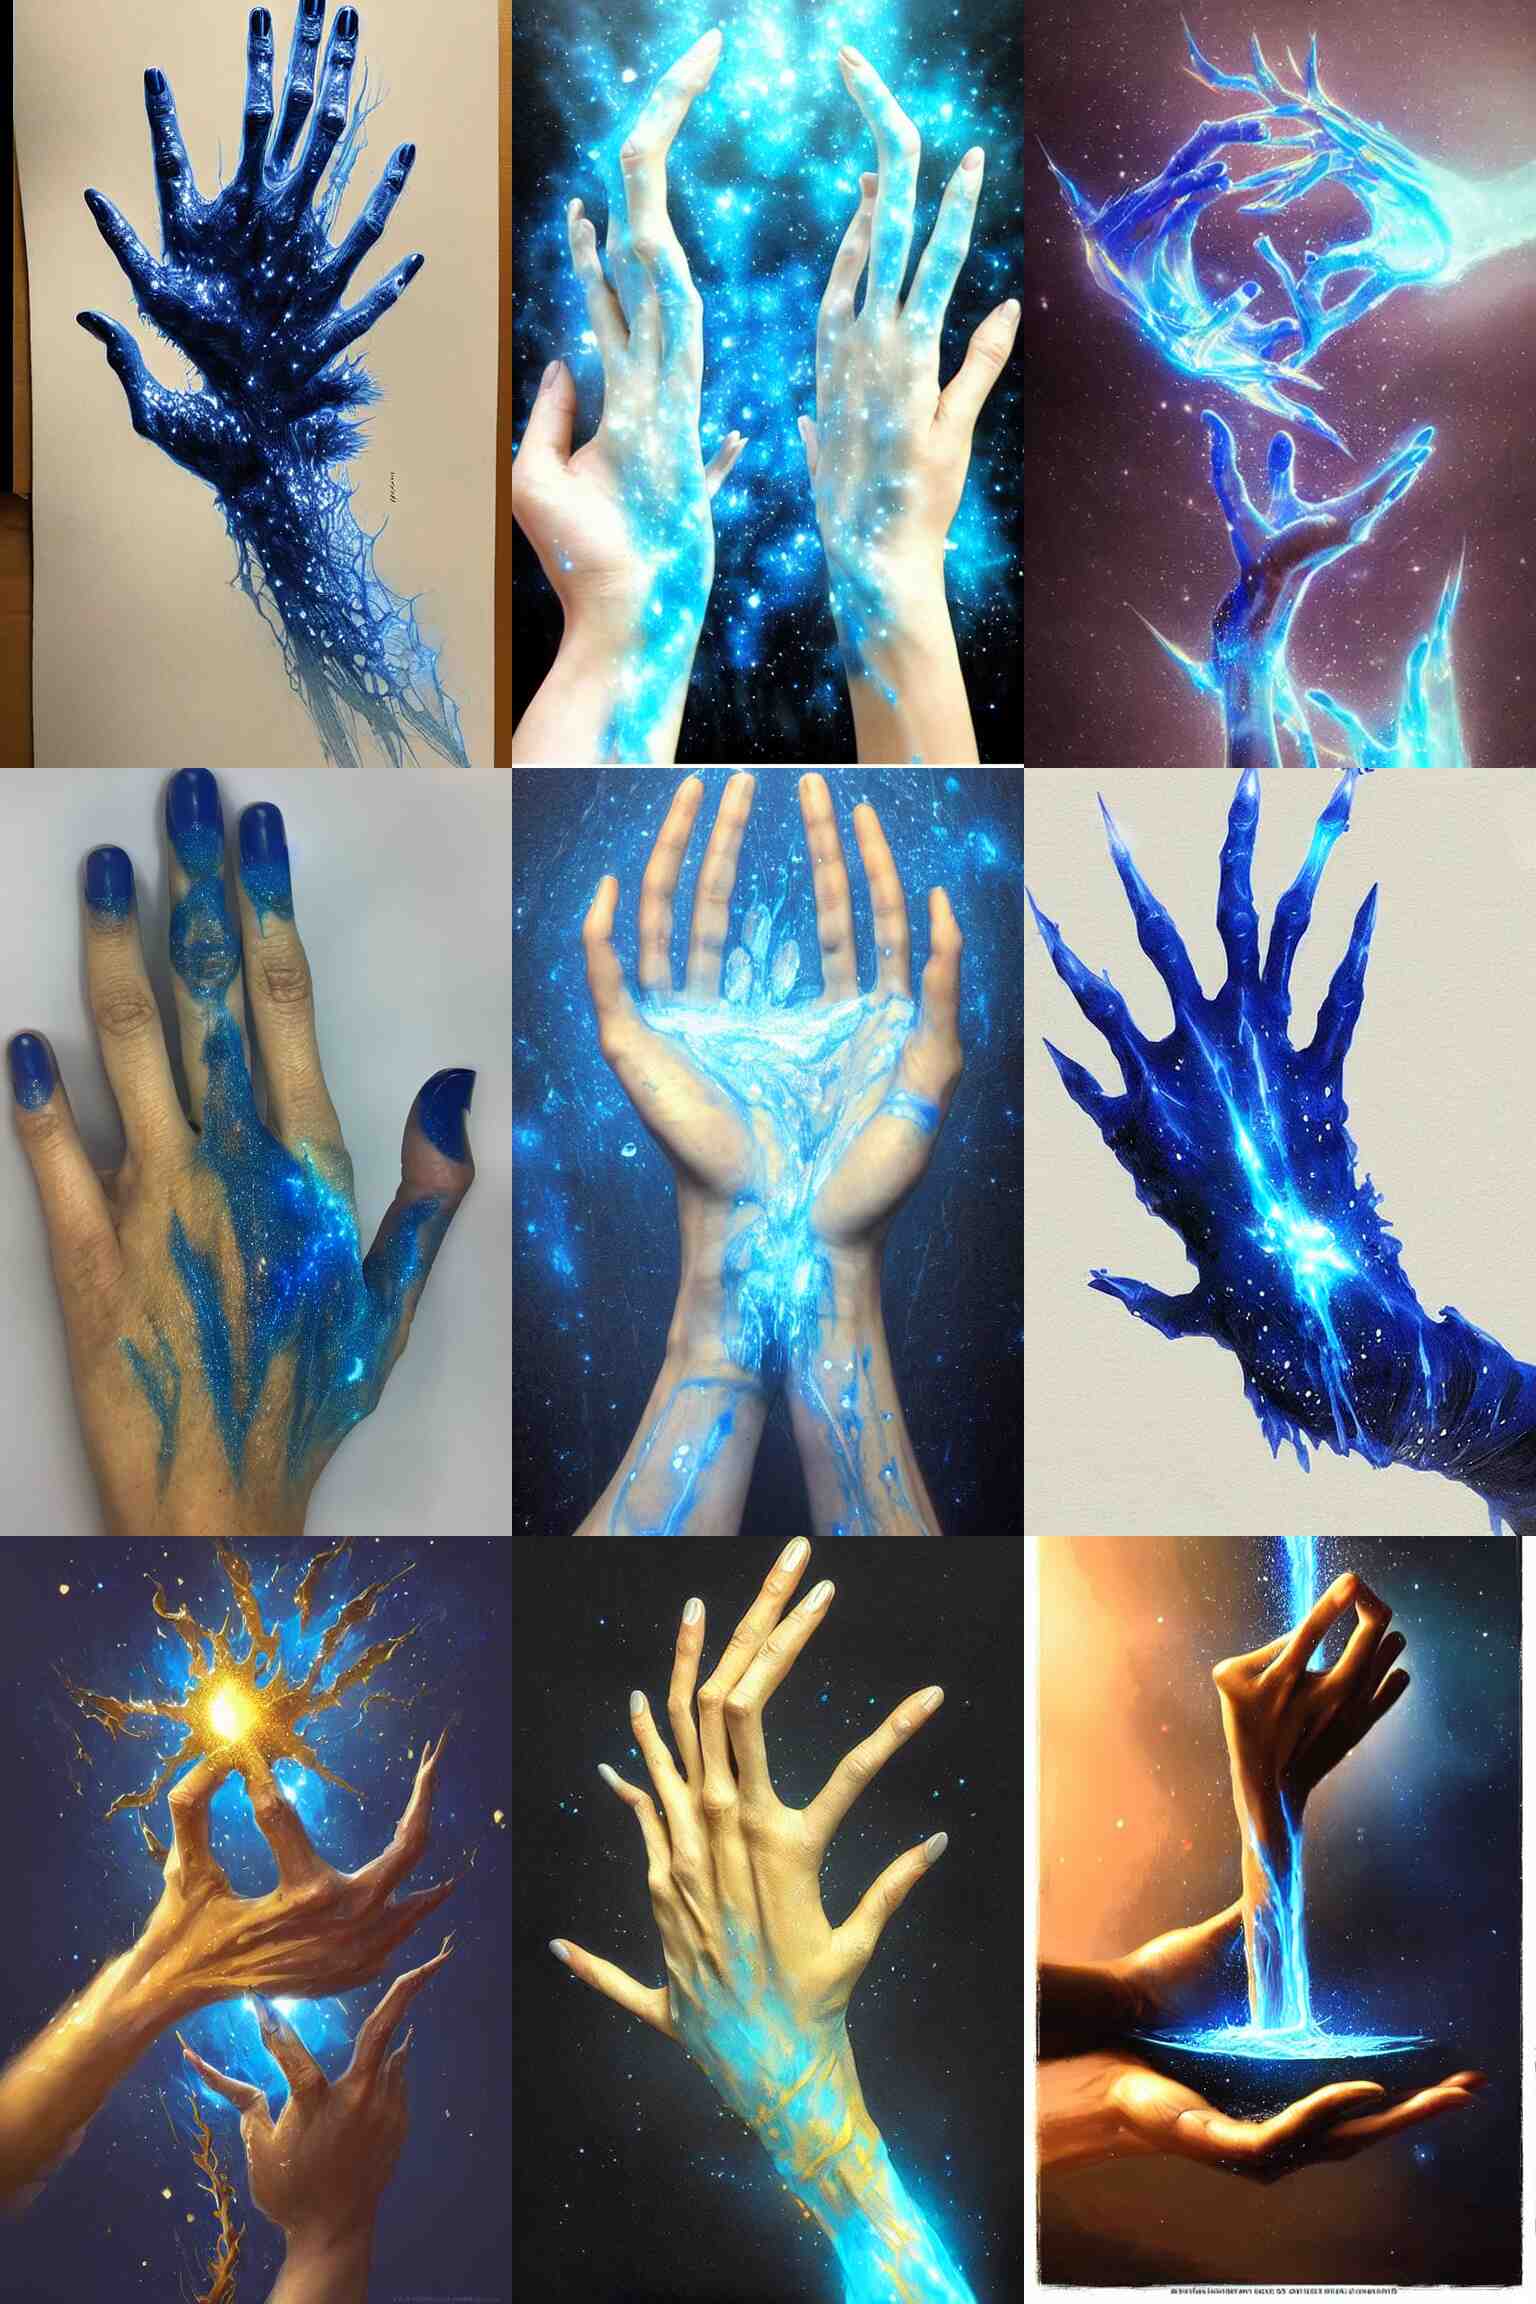 hand perfect greg rutkowski pours the water into the river soul care nature peace galaxies female blue fine line fractal glow proportional hand! dream greg rutkowski one container hyperrealistic beautiful, golden rule 